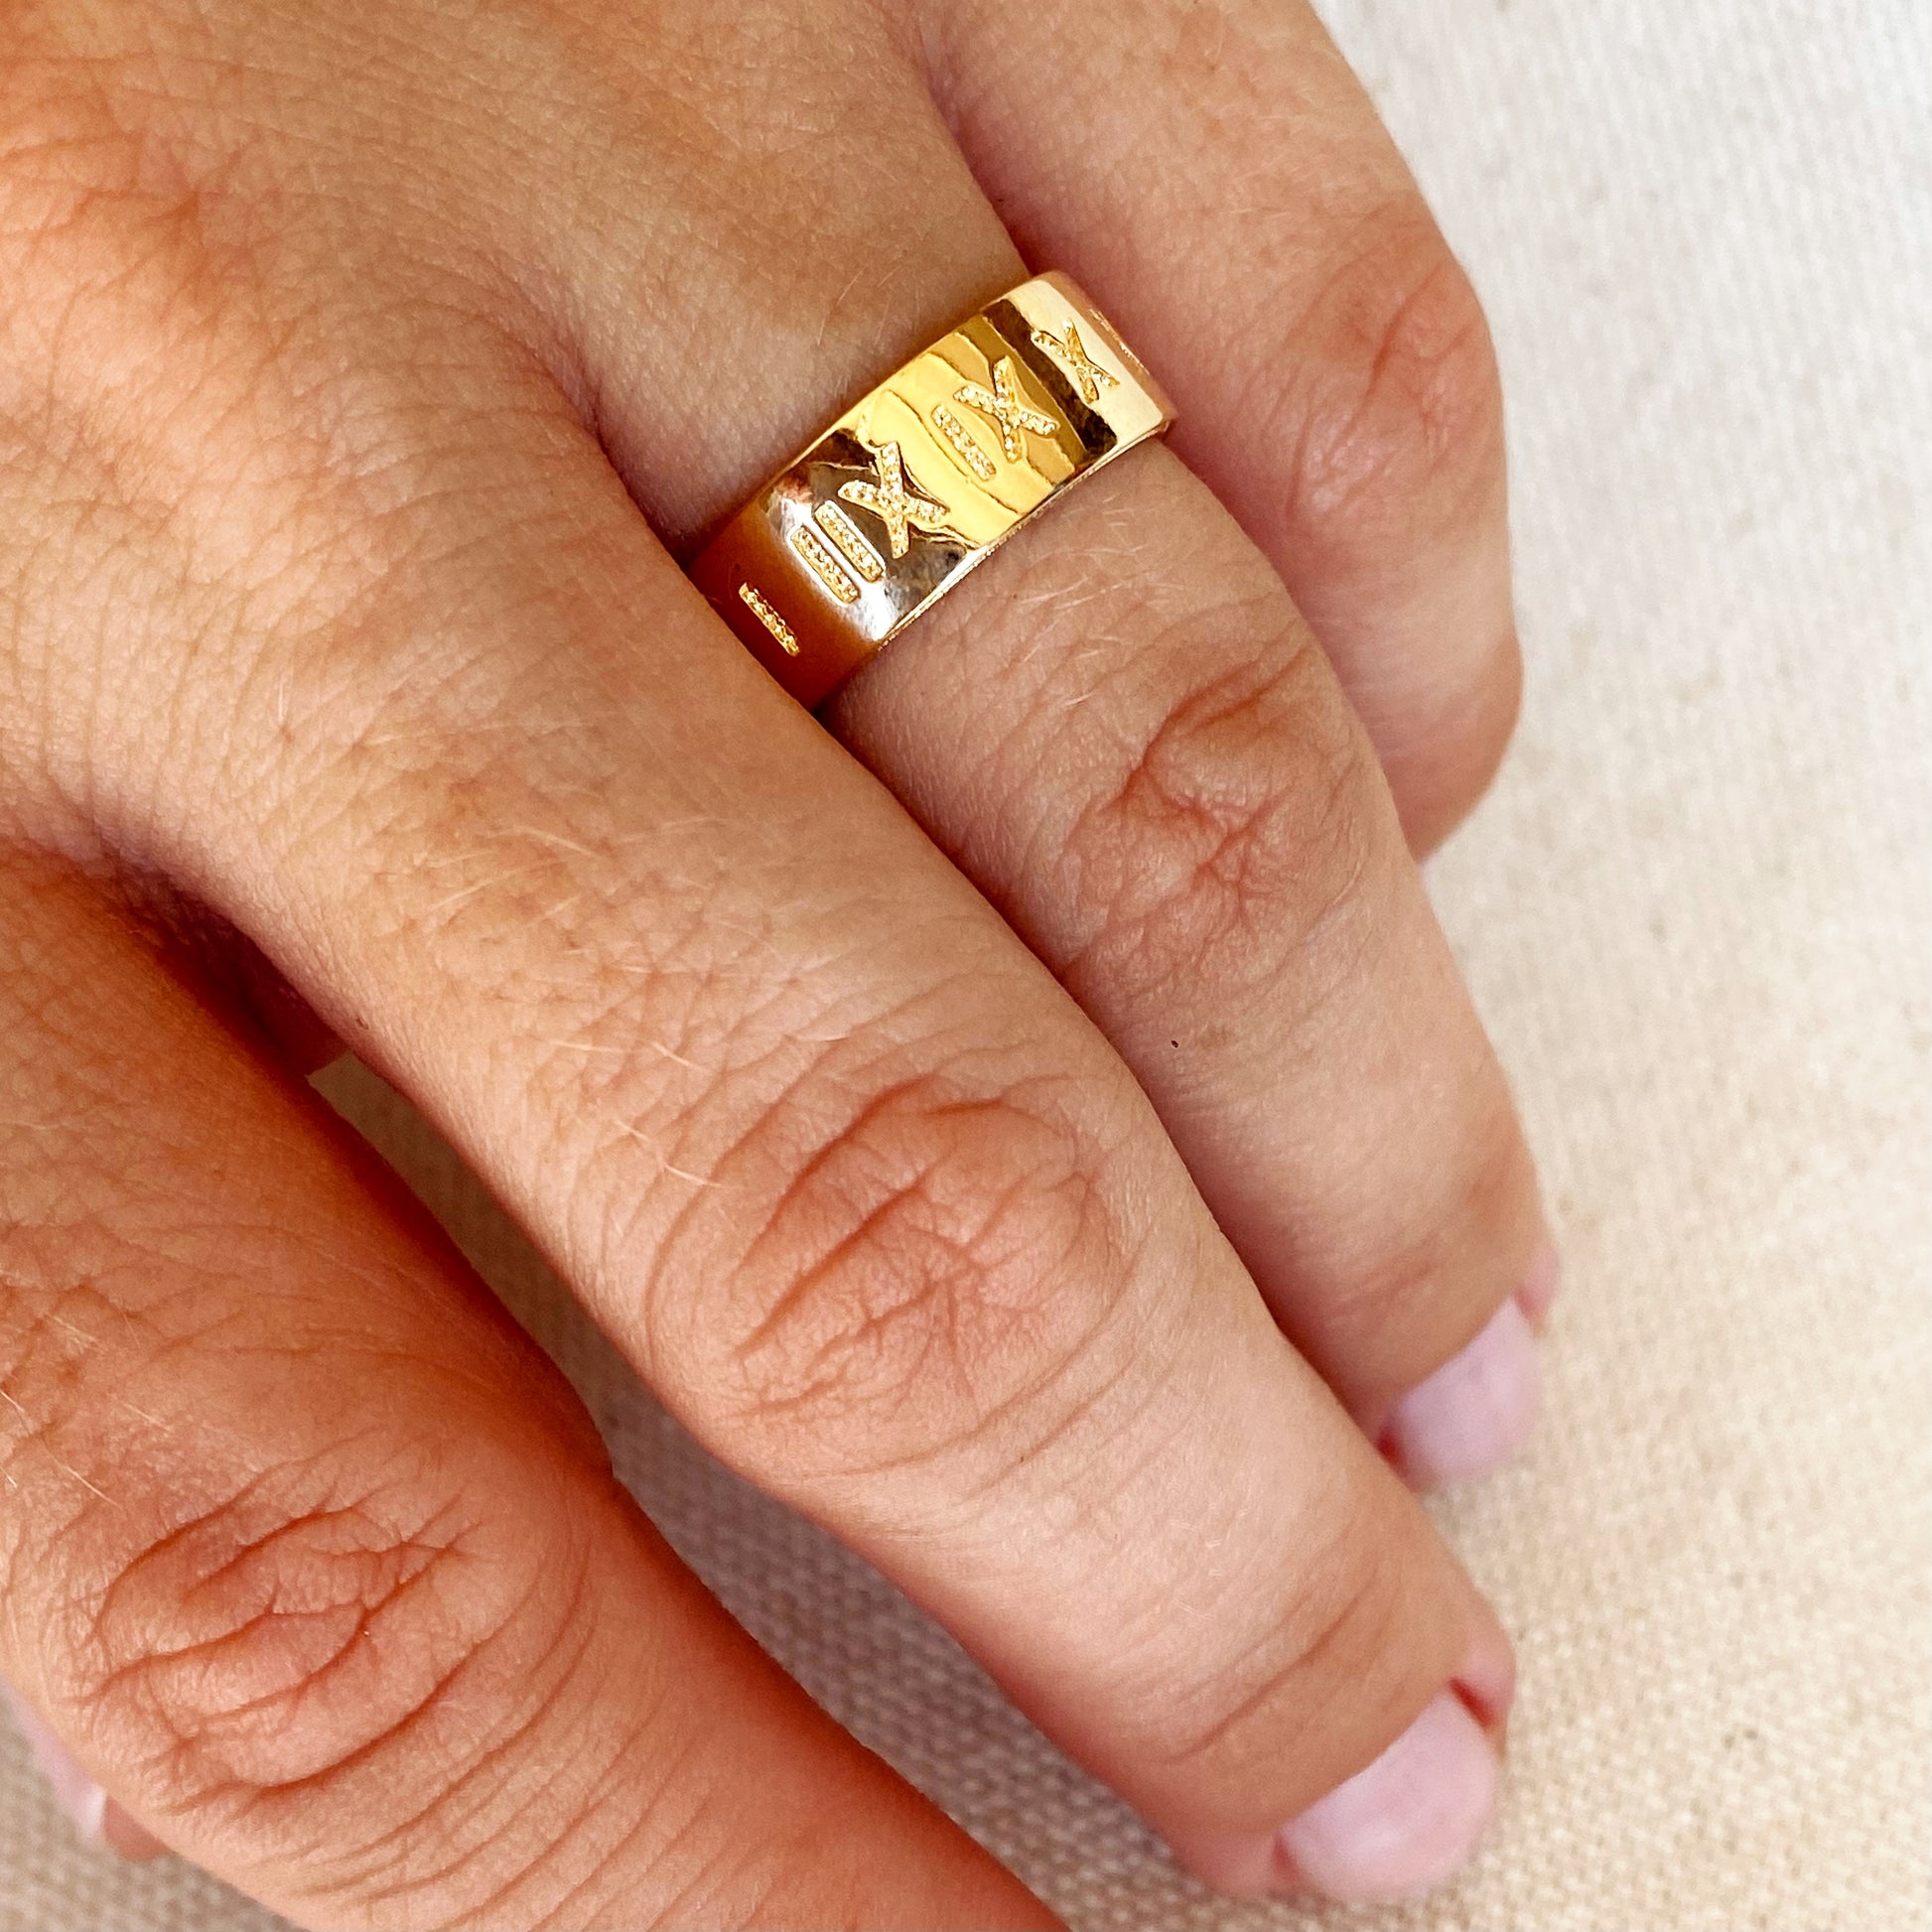 GoldFi 18k Gold Filled Roman Numeral Band Ring